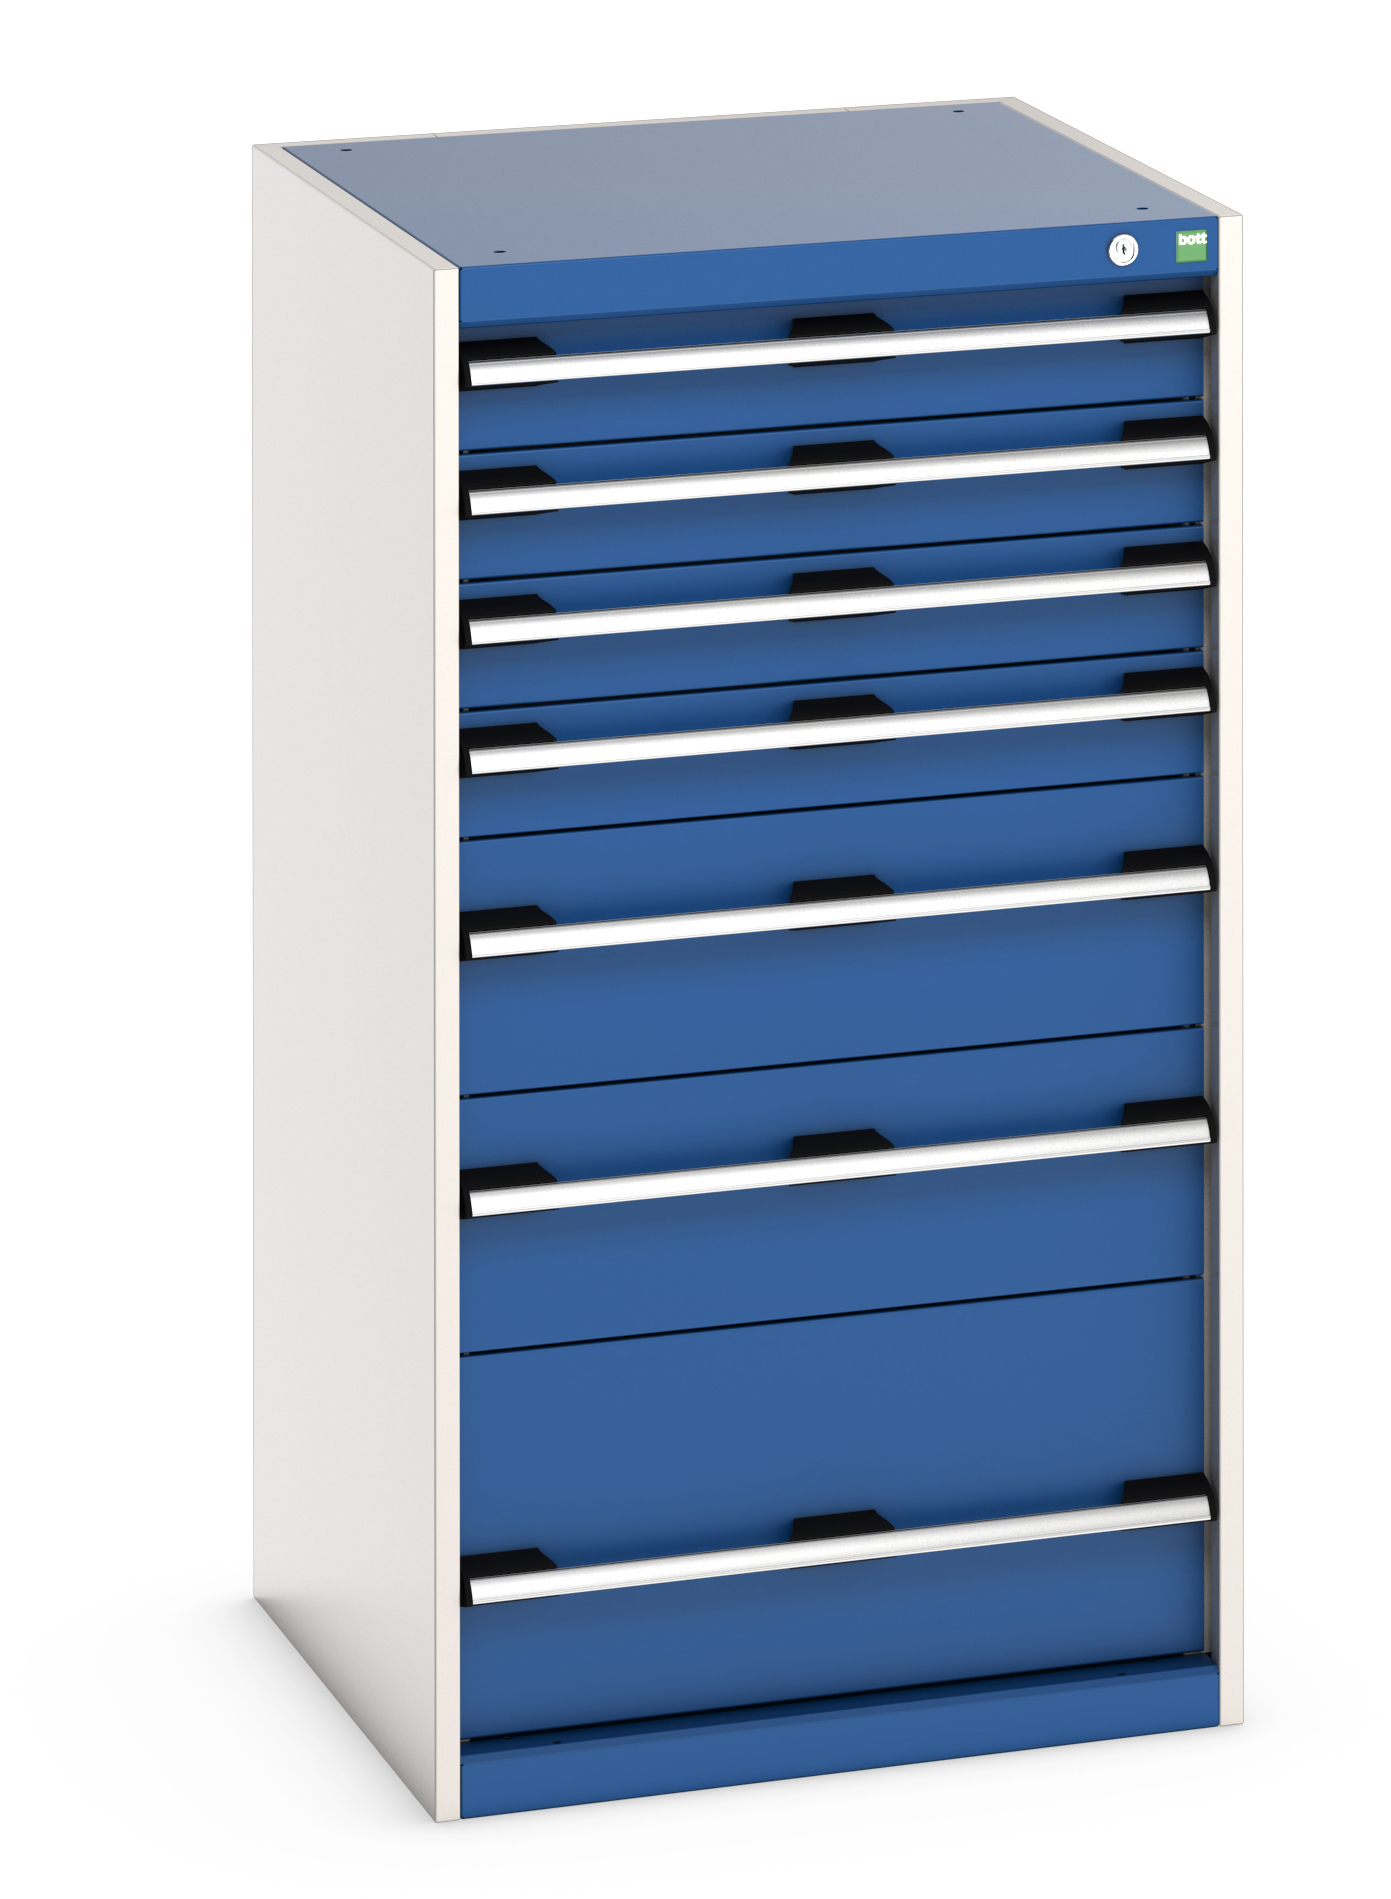 Bott Cubio Drawer Cabinet With 7 Drawers - 40019069.11V